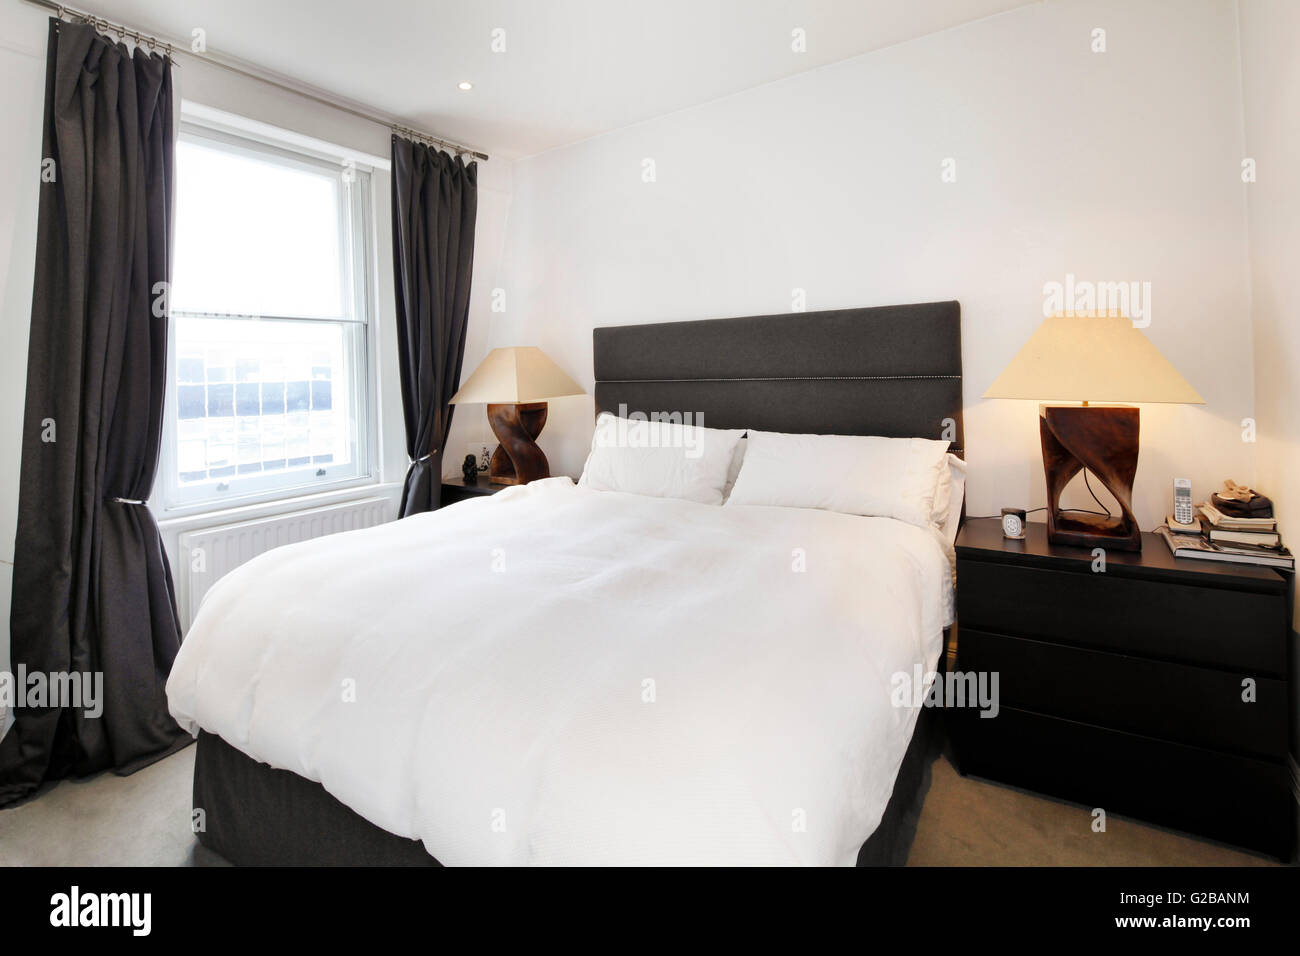 Walden House, Marylebone High Street. Modern bedroom with white linen and wood floors. Stock Photo